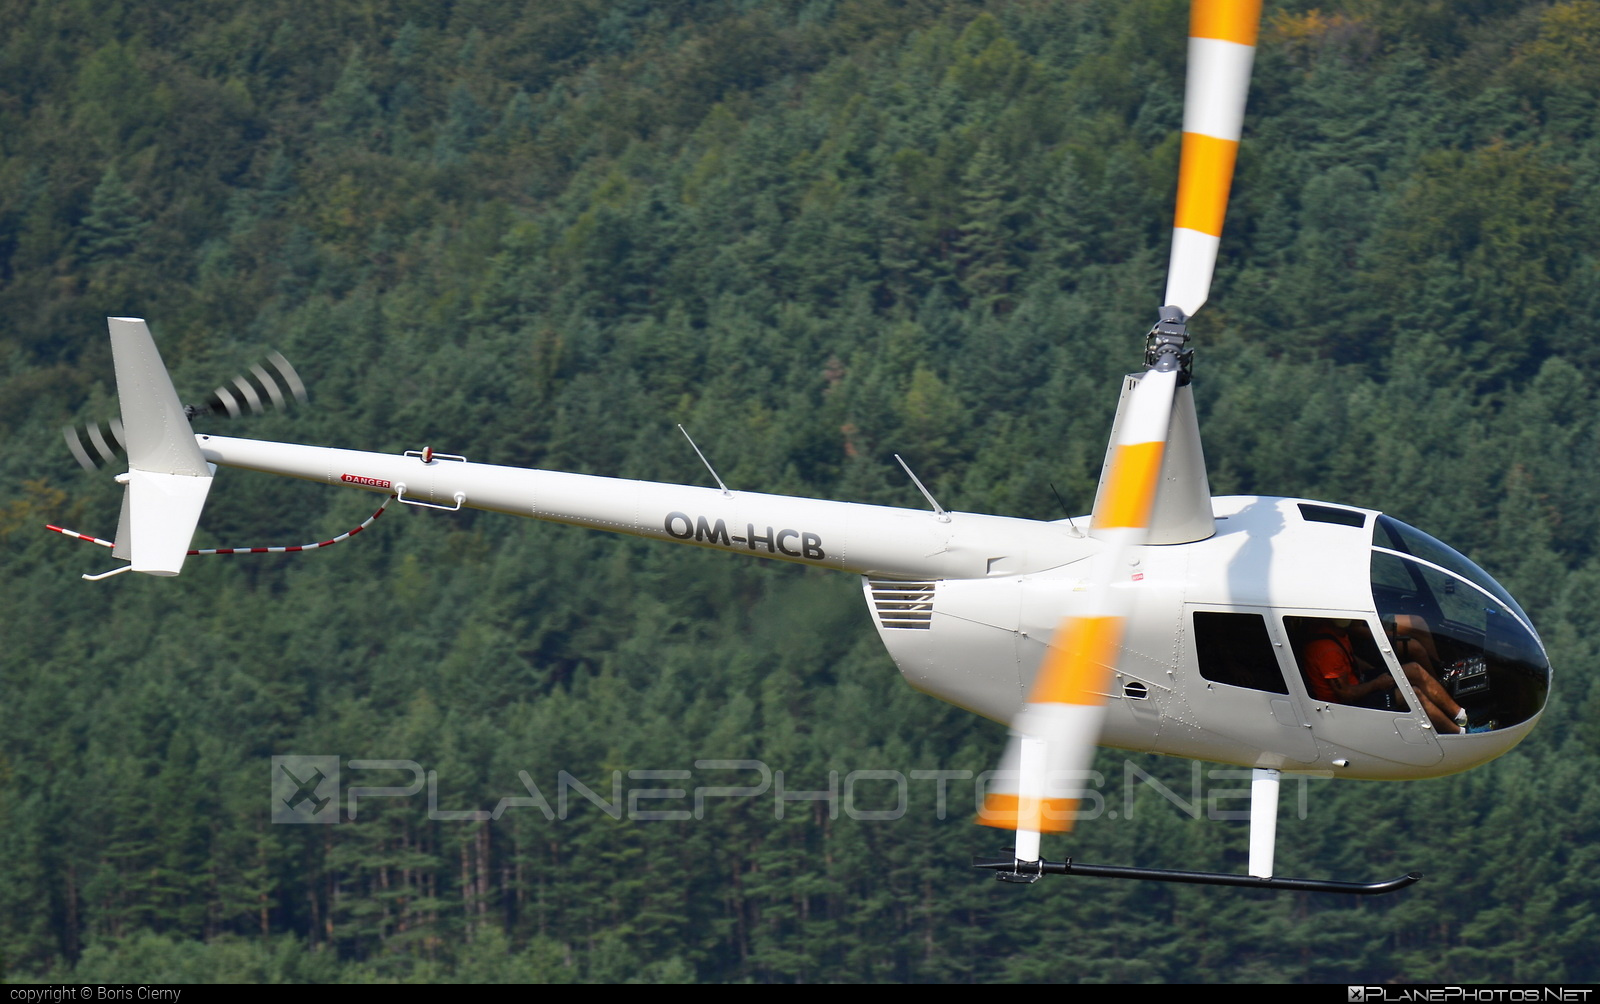 Robinson R44 Raven - OM-HCB operated by TECH-MONT Helicopter company #r44 #r44raven #robinson #robinson44 #robinson44raven #robinsonr44 #robinsonr44raven